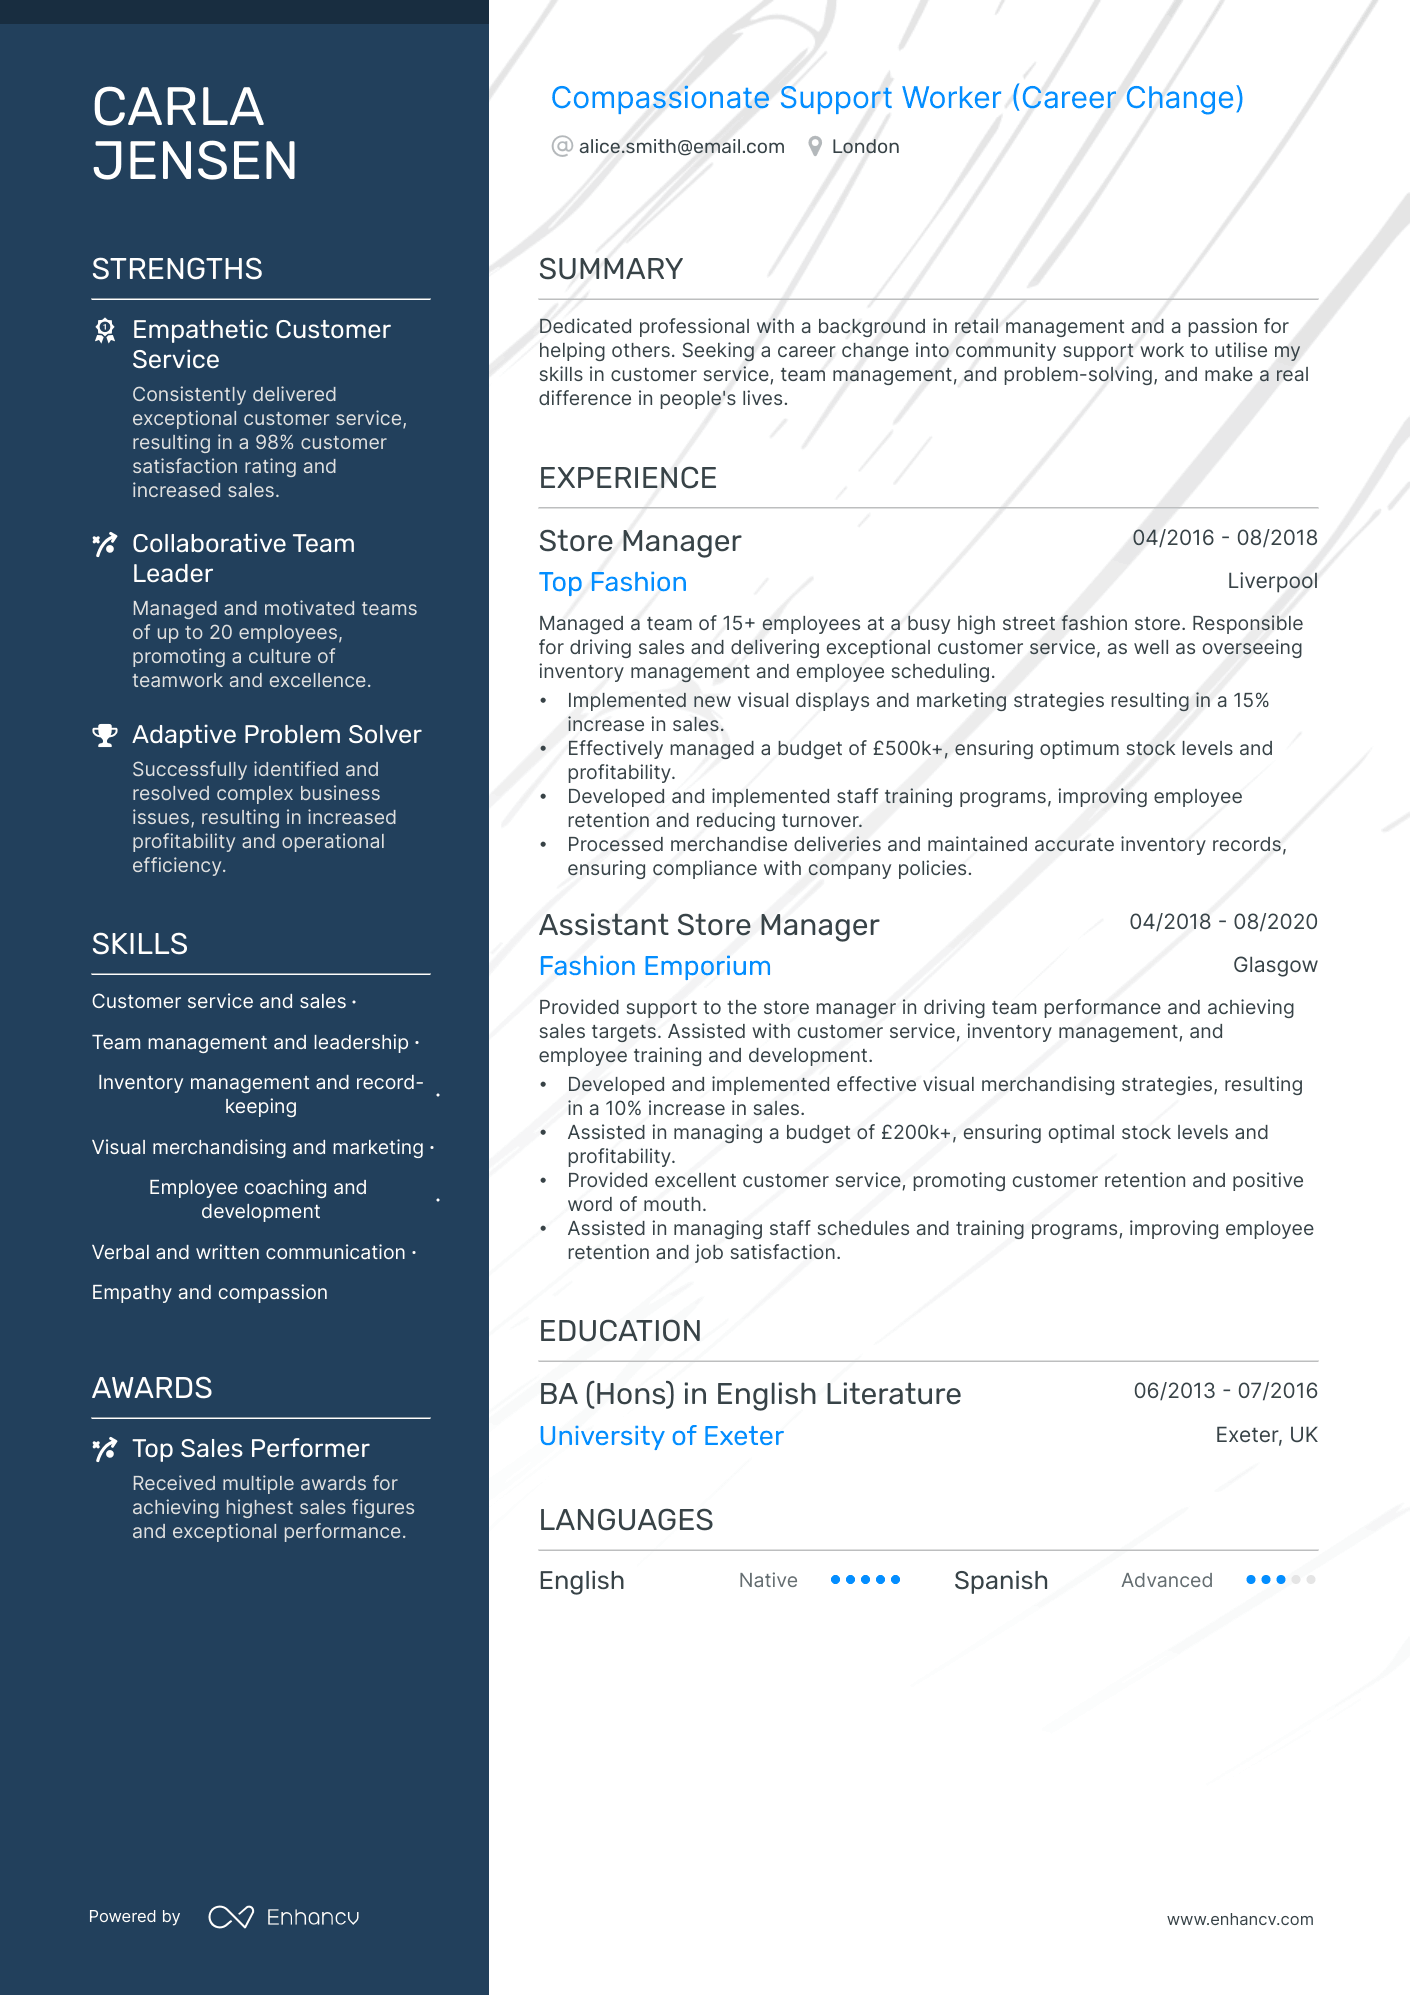 Compassionate Support Worker (Career Change) CV example